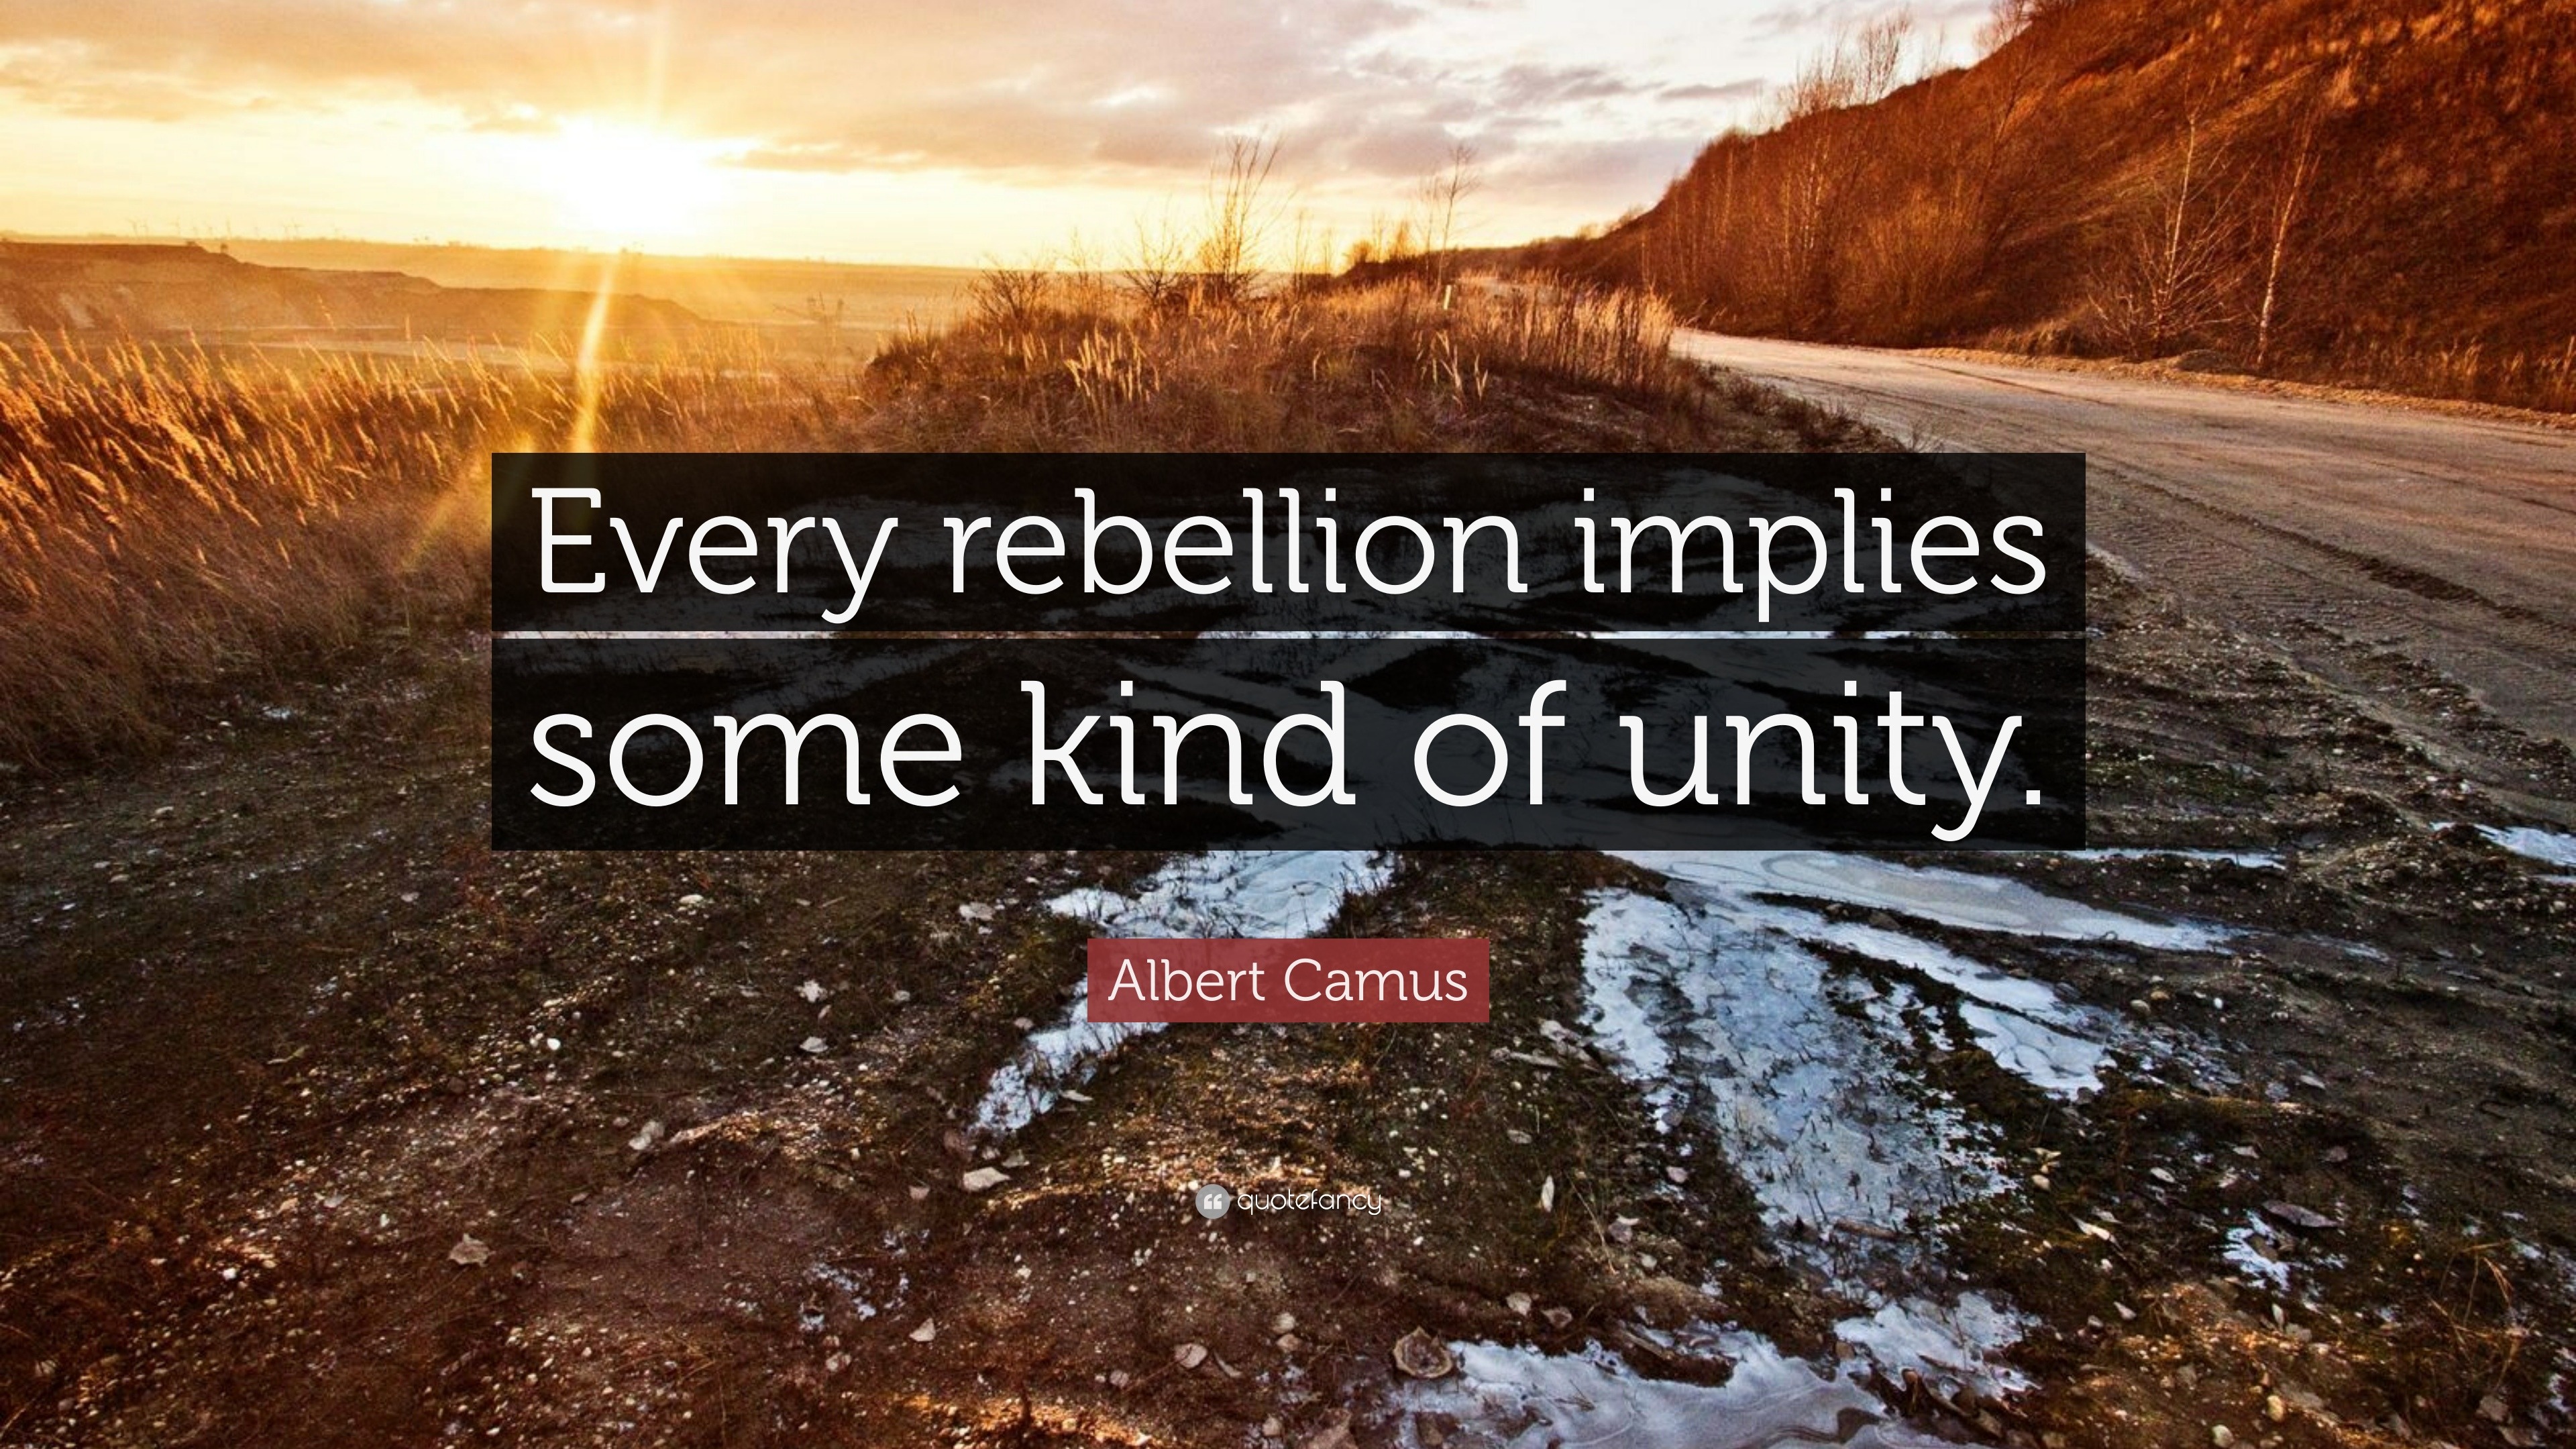 Albert Camus Quote “Every rebellion implies some kind of unity.” (7